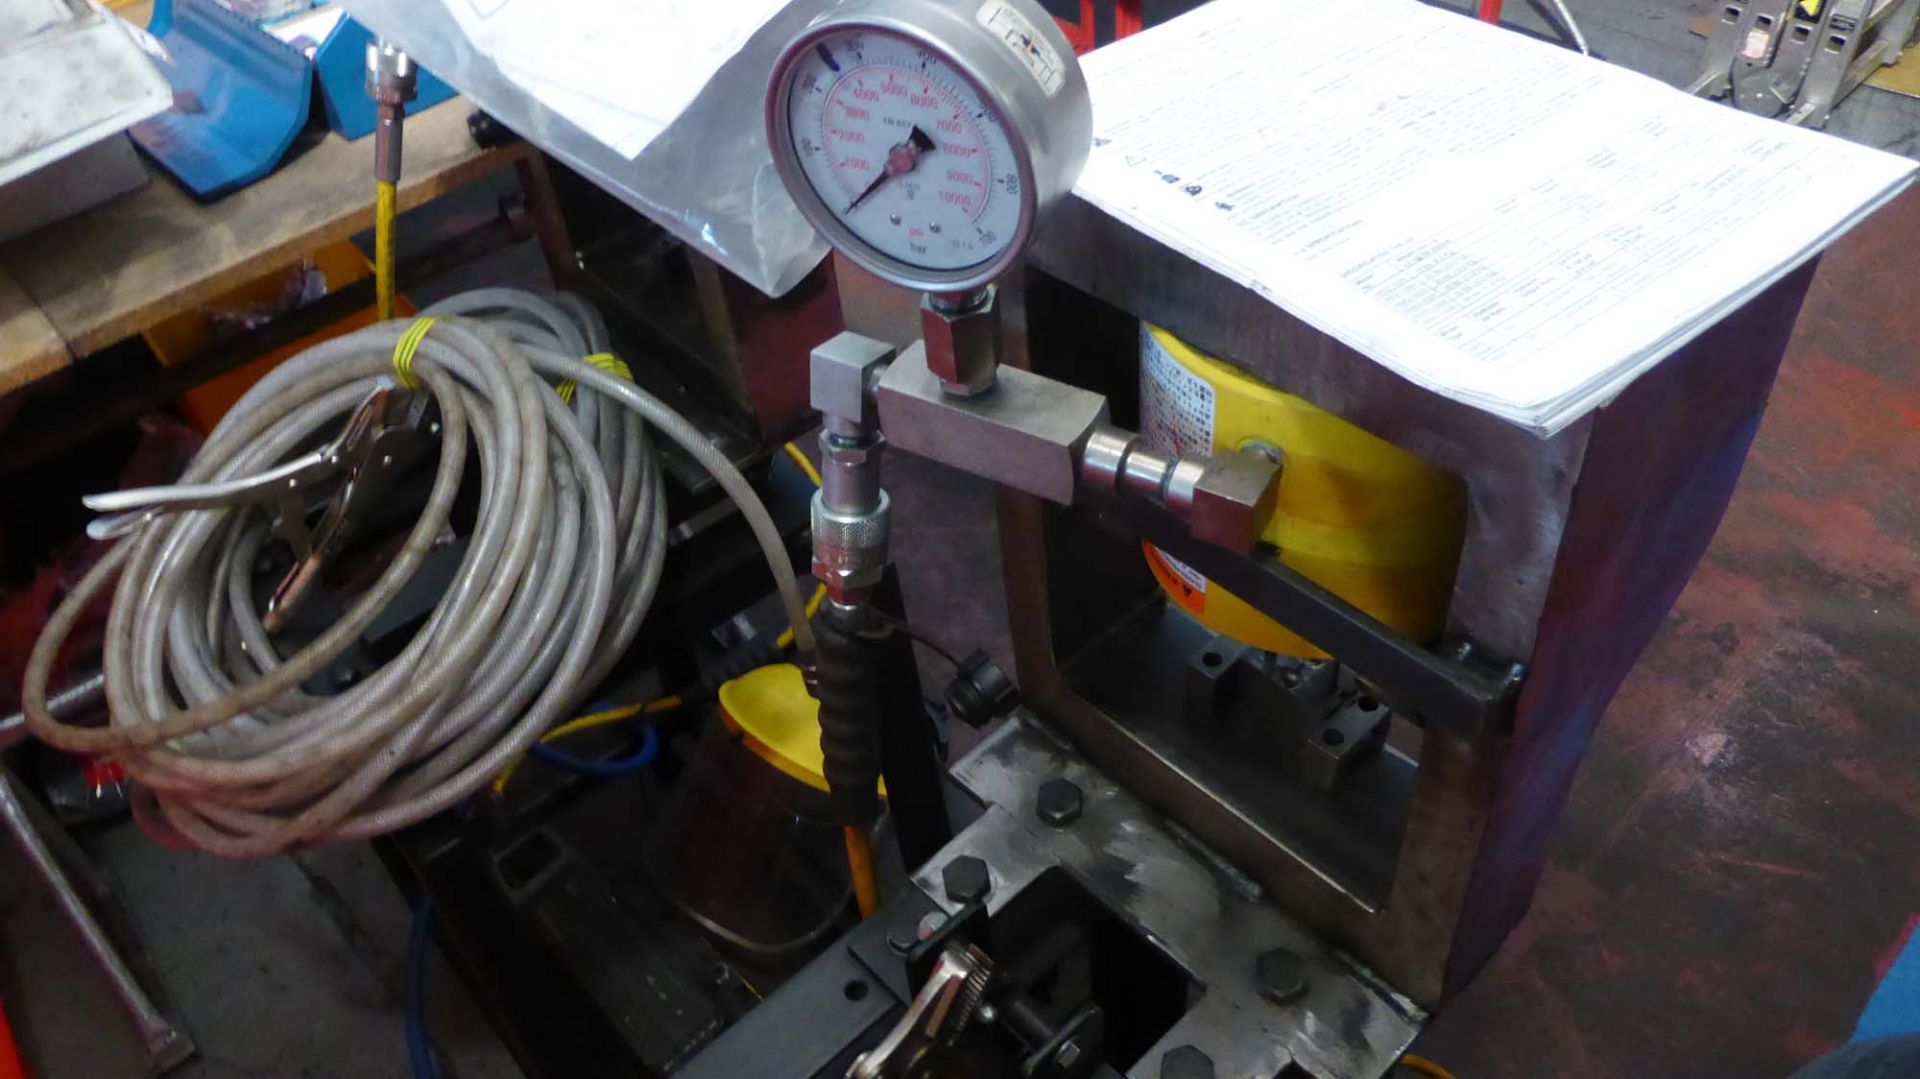 Specialist Enerpac 100 tonnes capacaity manual pneumatic crimping press with treadle control - Image 2 of 2